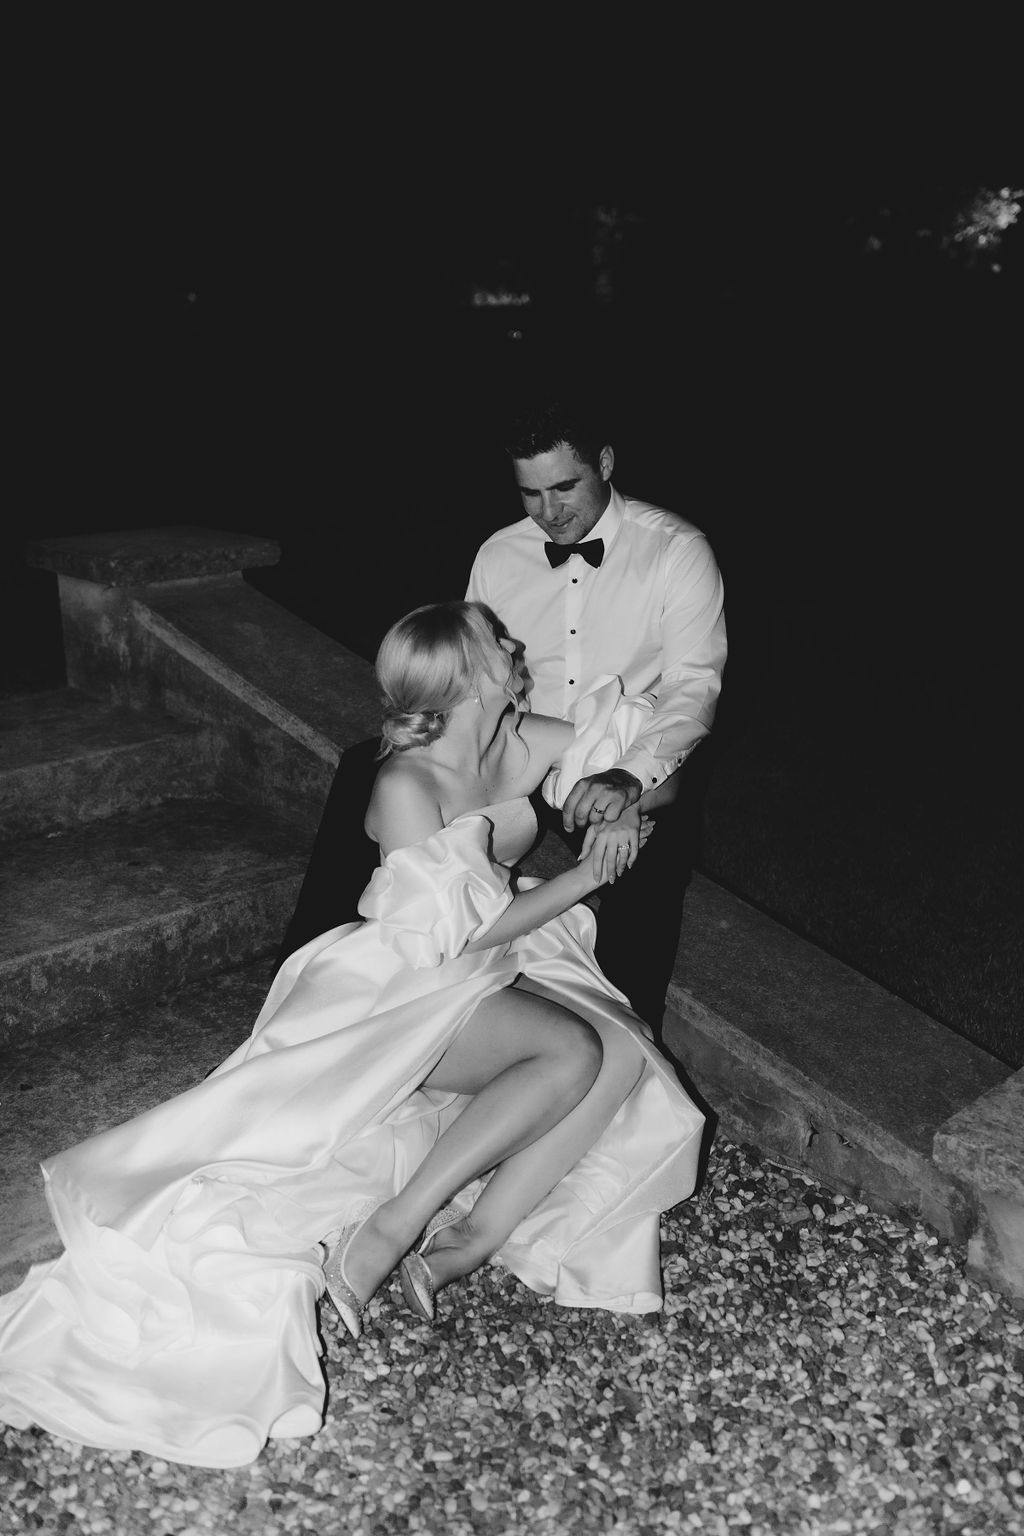 A black-and-white photo of a couple sitting on stone steps at night. The woman is wearing a white, off-shoulder dress with a flowing train, and the man is in a white shirt with a black bow tie. They are holding hands, sharing an intimate moment.